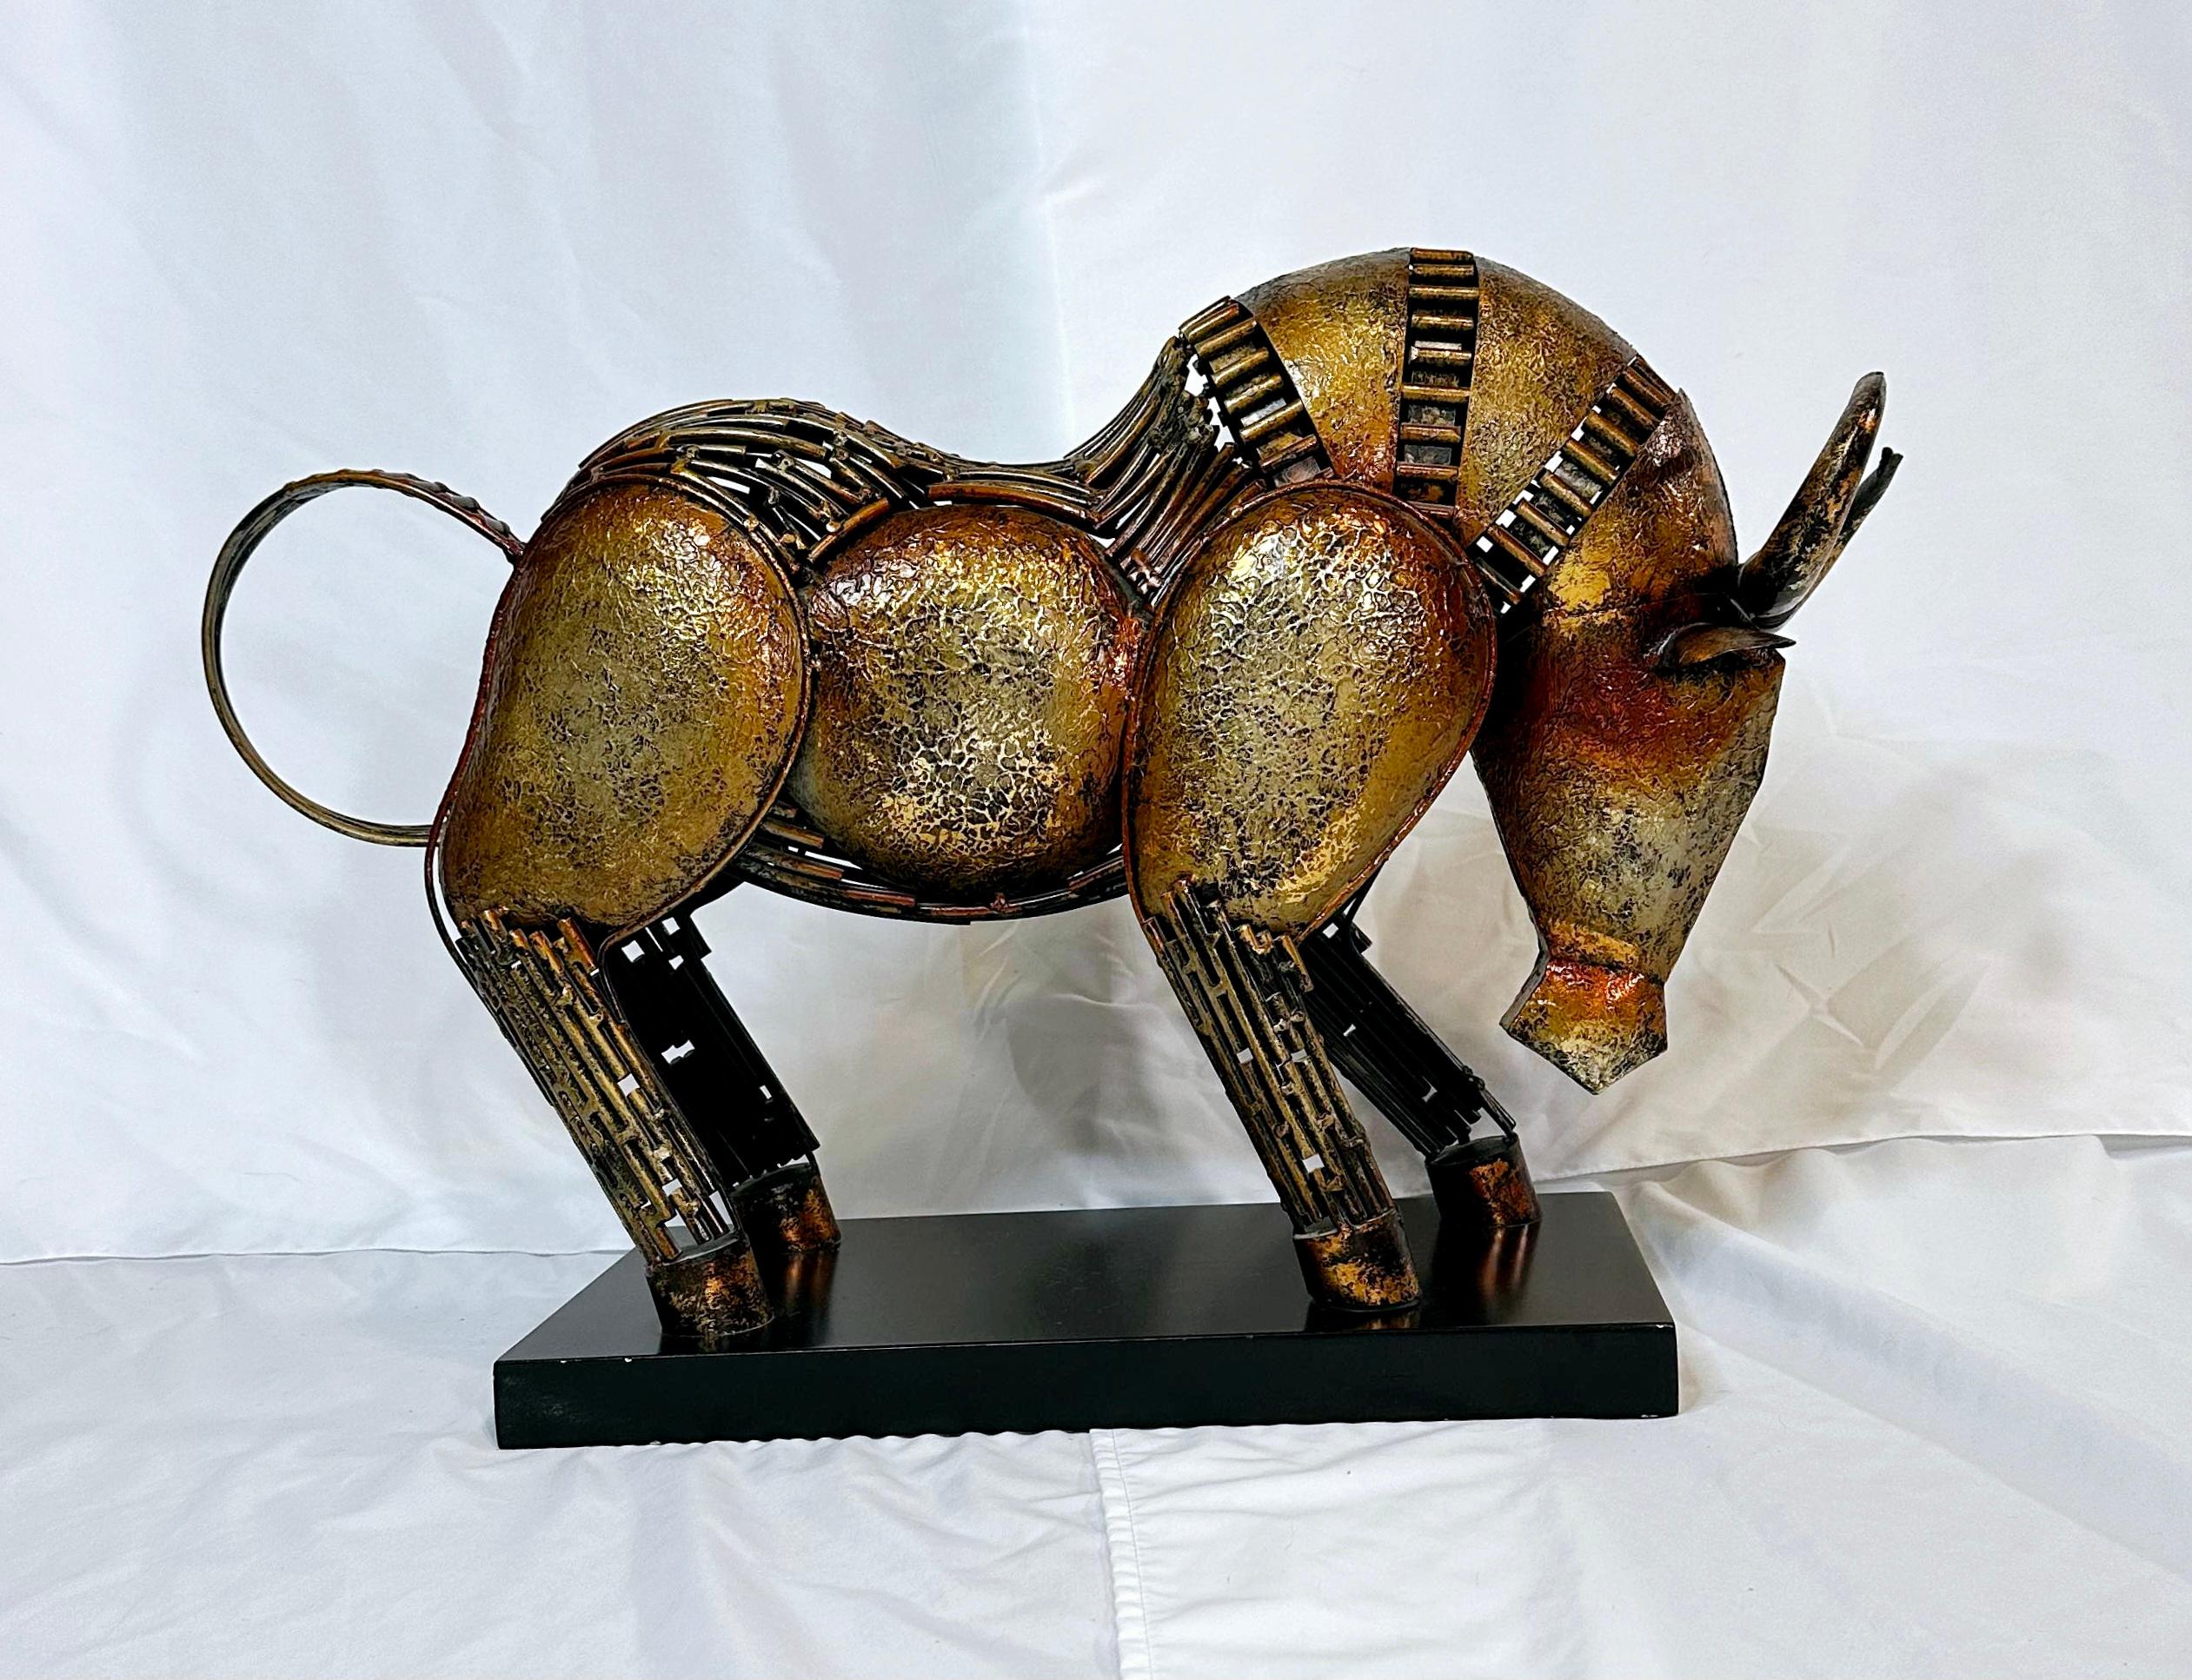 Brutalist style sculpture of a charging bull.
Heavy, solid piece. 
Statement piece. 
Perfect for a sofa or entry table.
Made of welded metal and painted with gold gradient.
Affixed to a black wooden base. 
Approximately 16 inches tall and 24 inches